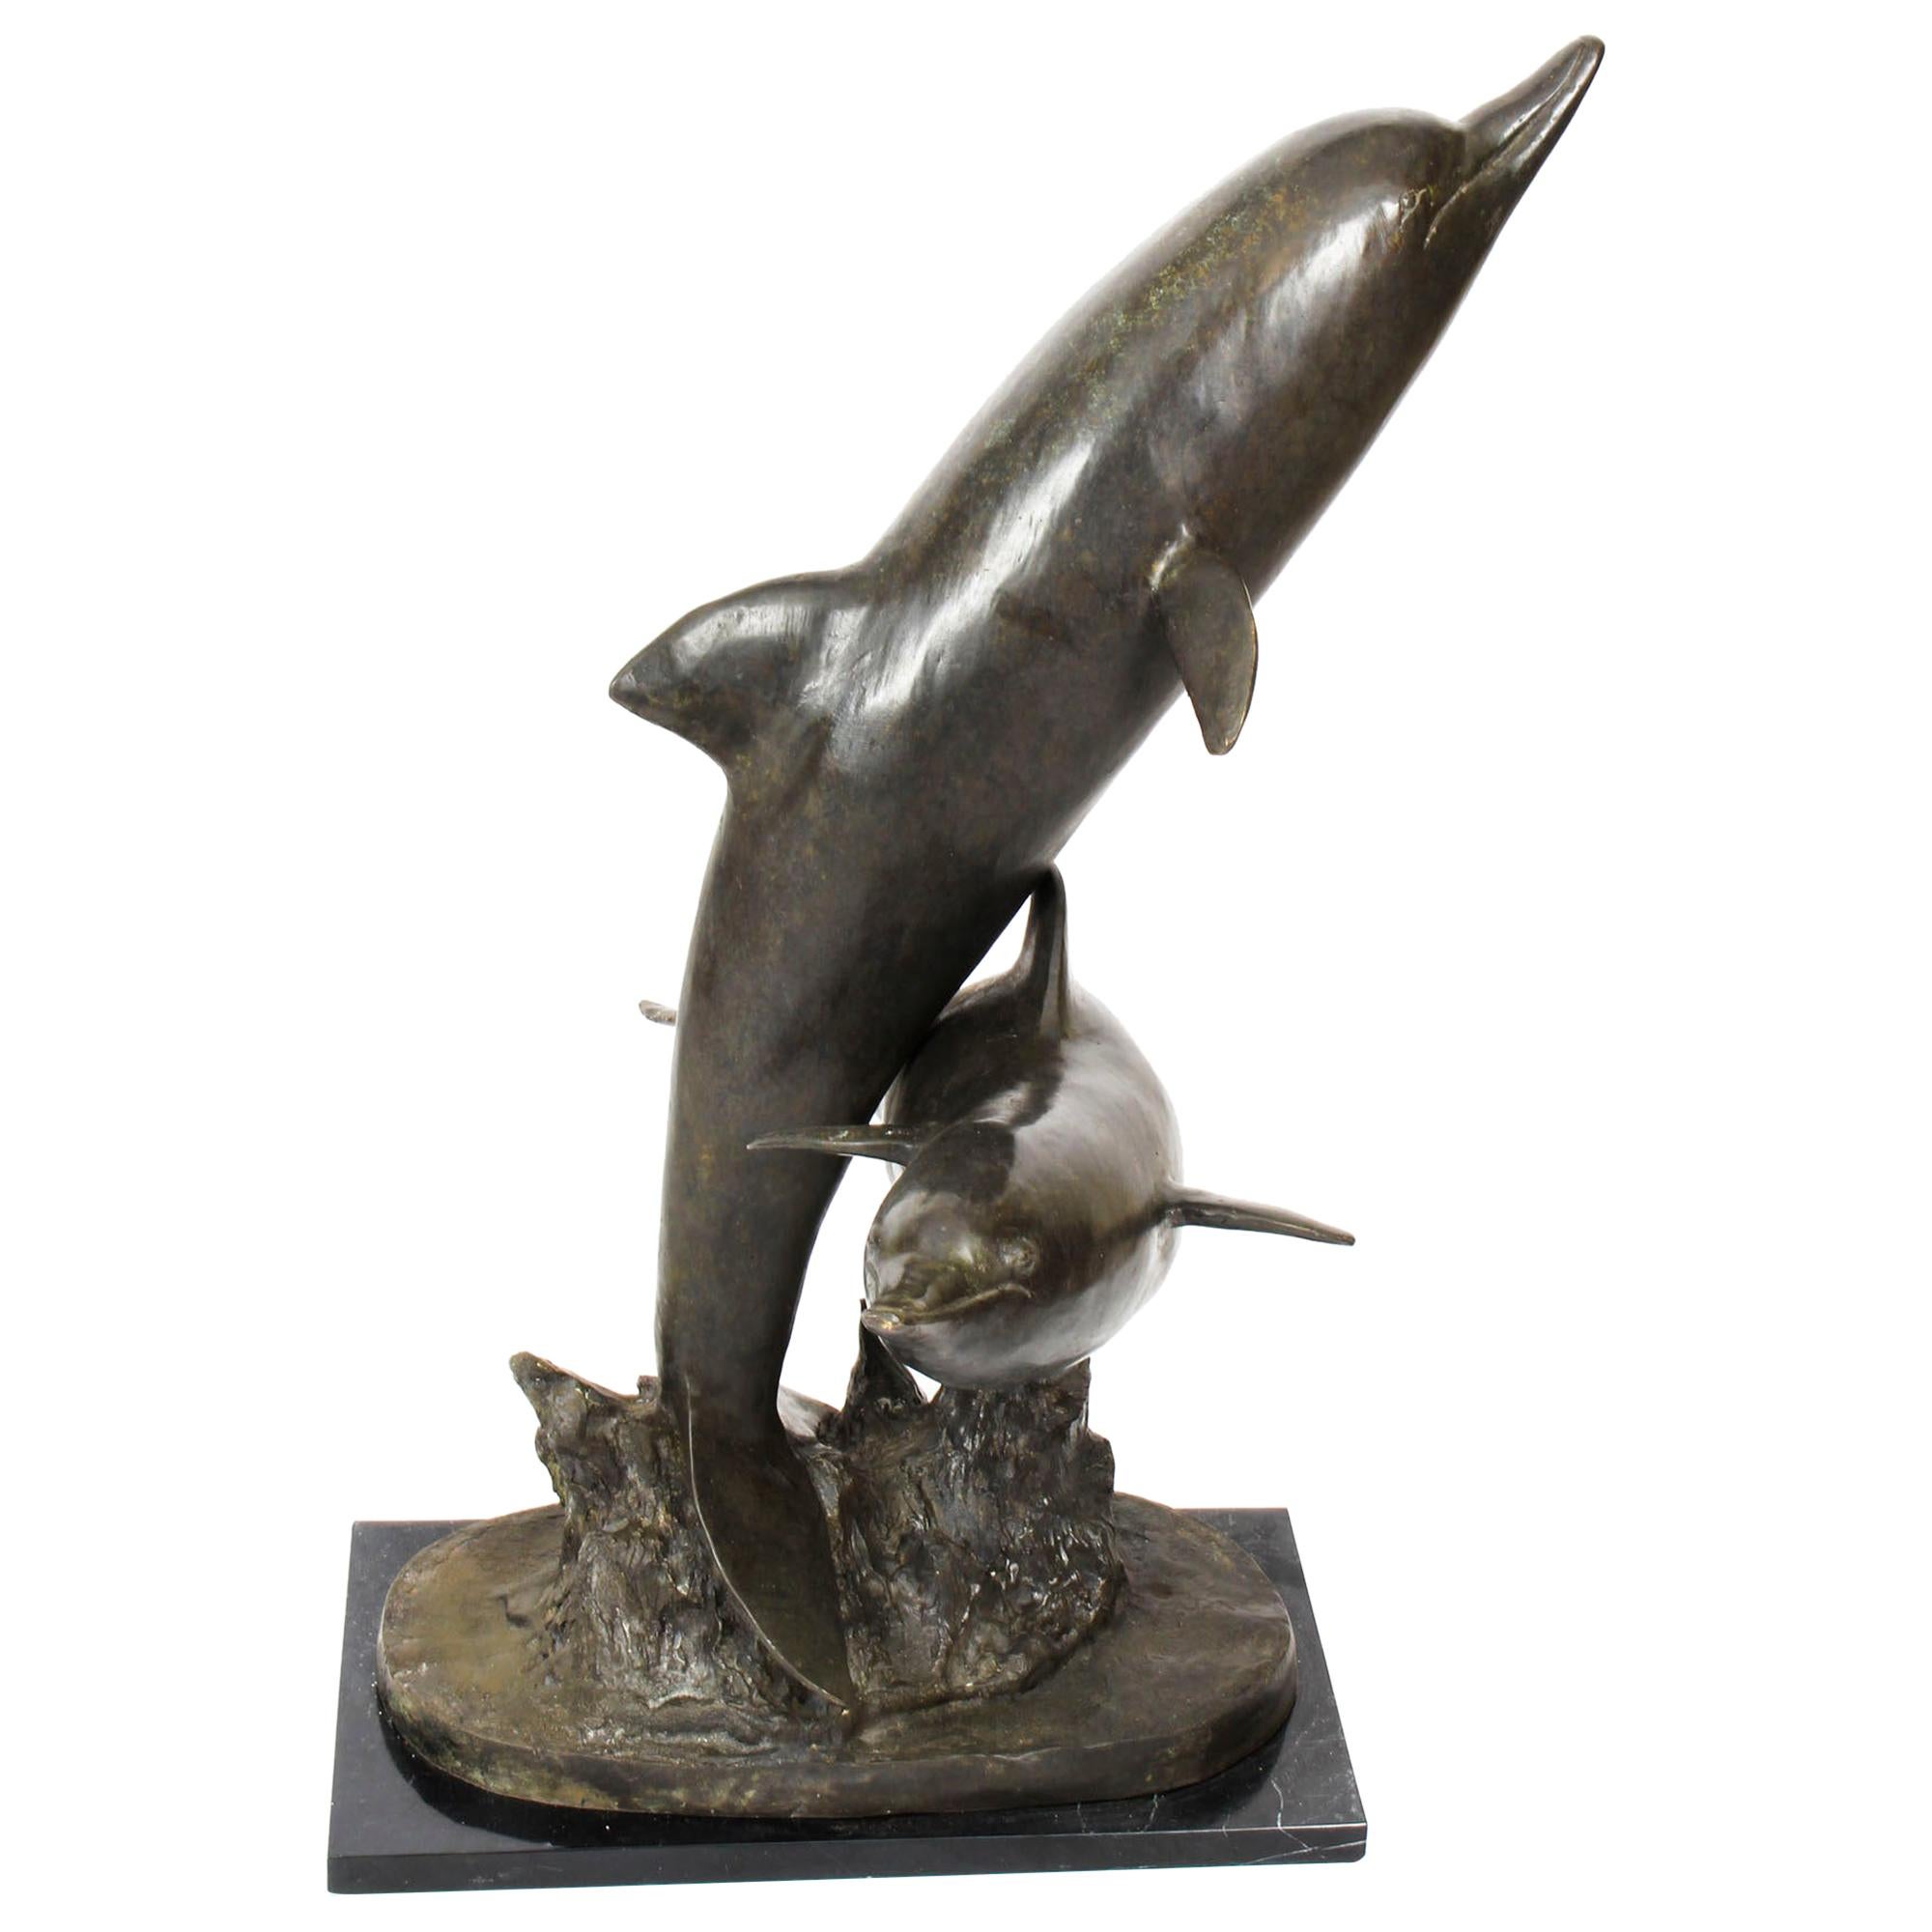 Vintage Bronze Statue of Dolphins Riding the Waves, Late 20th Century